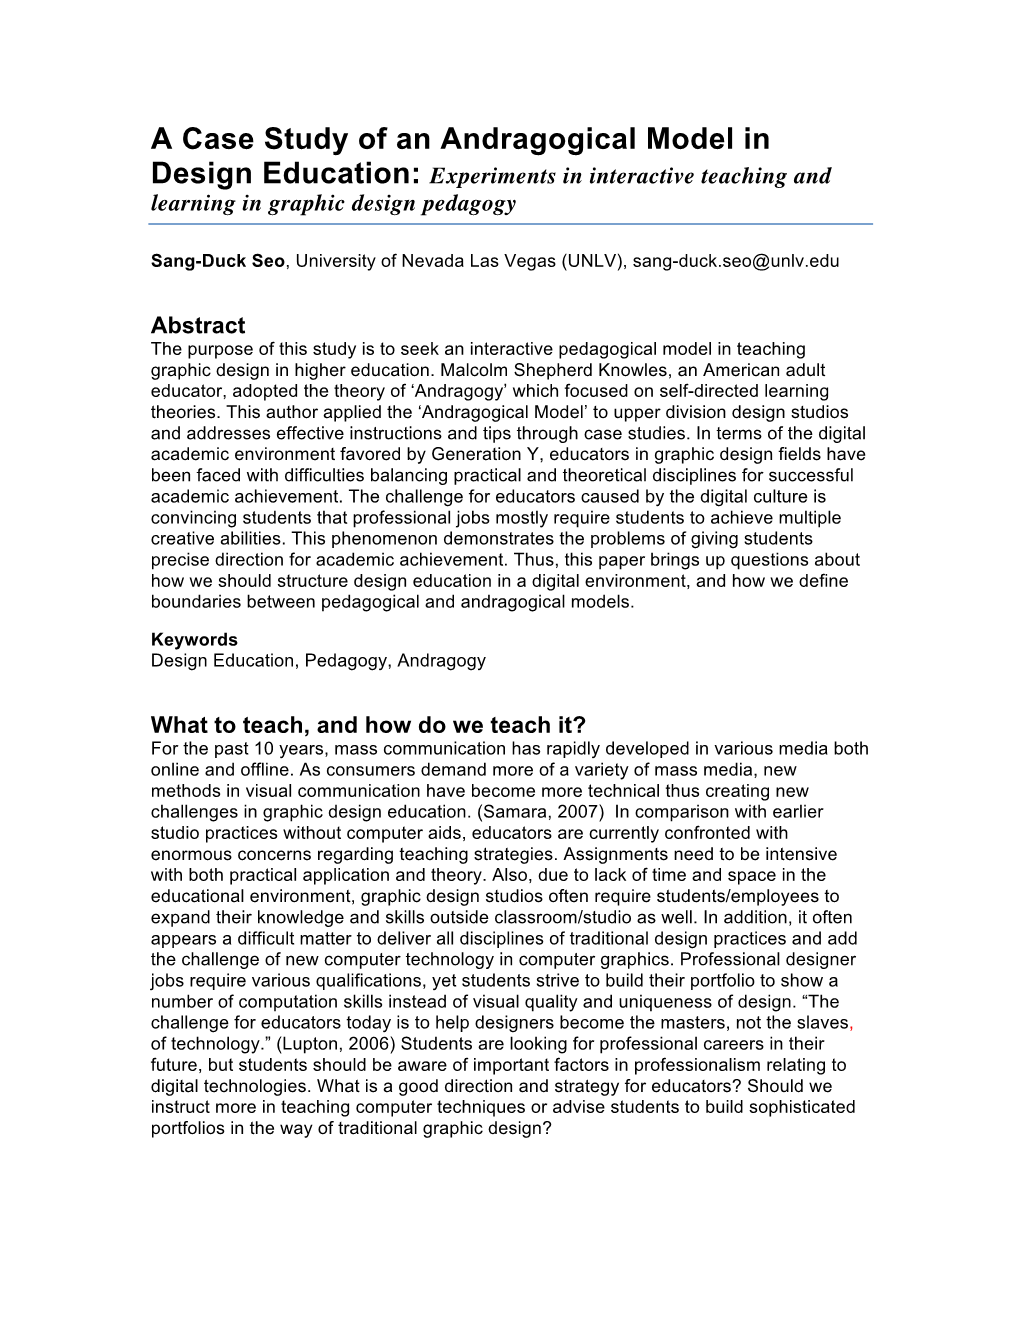 A Case Study of an Andragogical Model in Design Education: Experiments in Interactive Teaching and Learning in Graphic Design Pedagogy